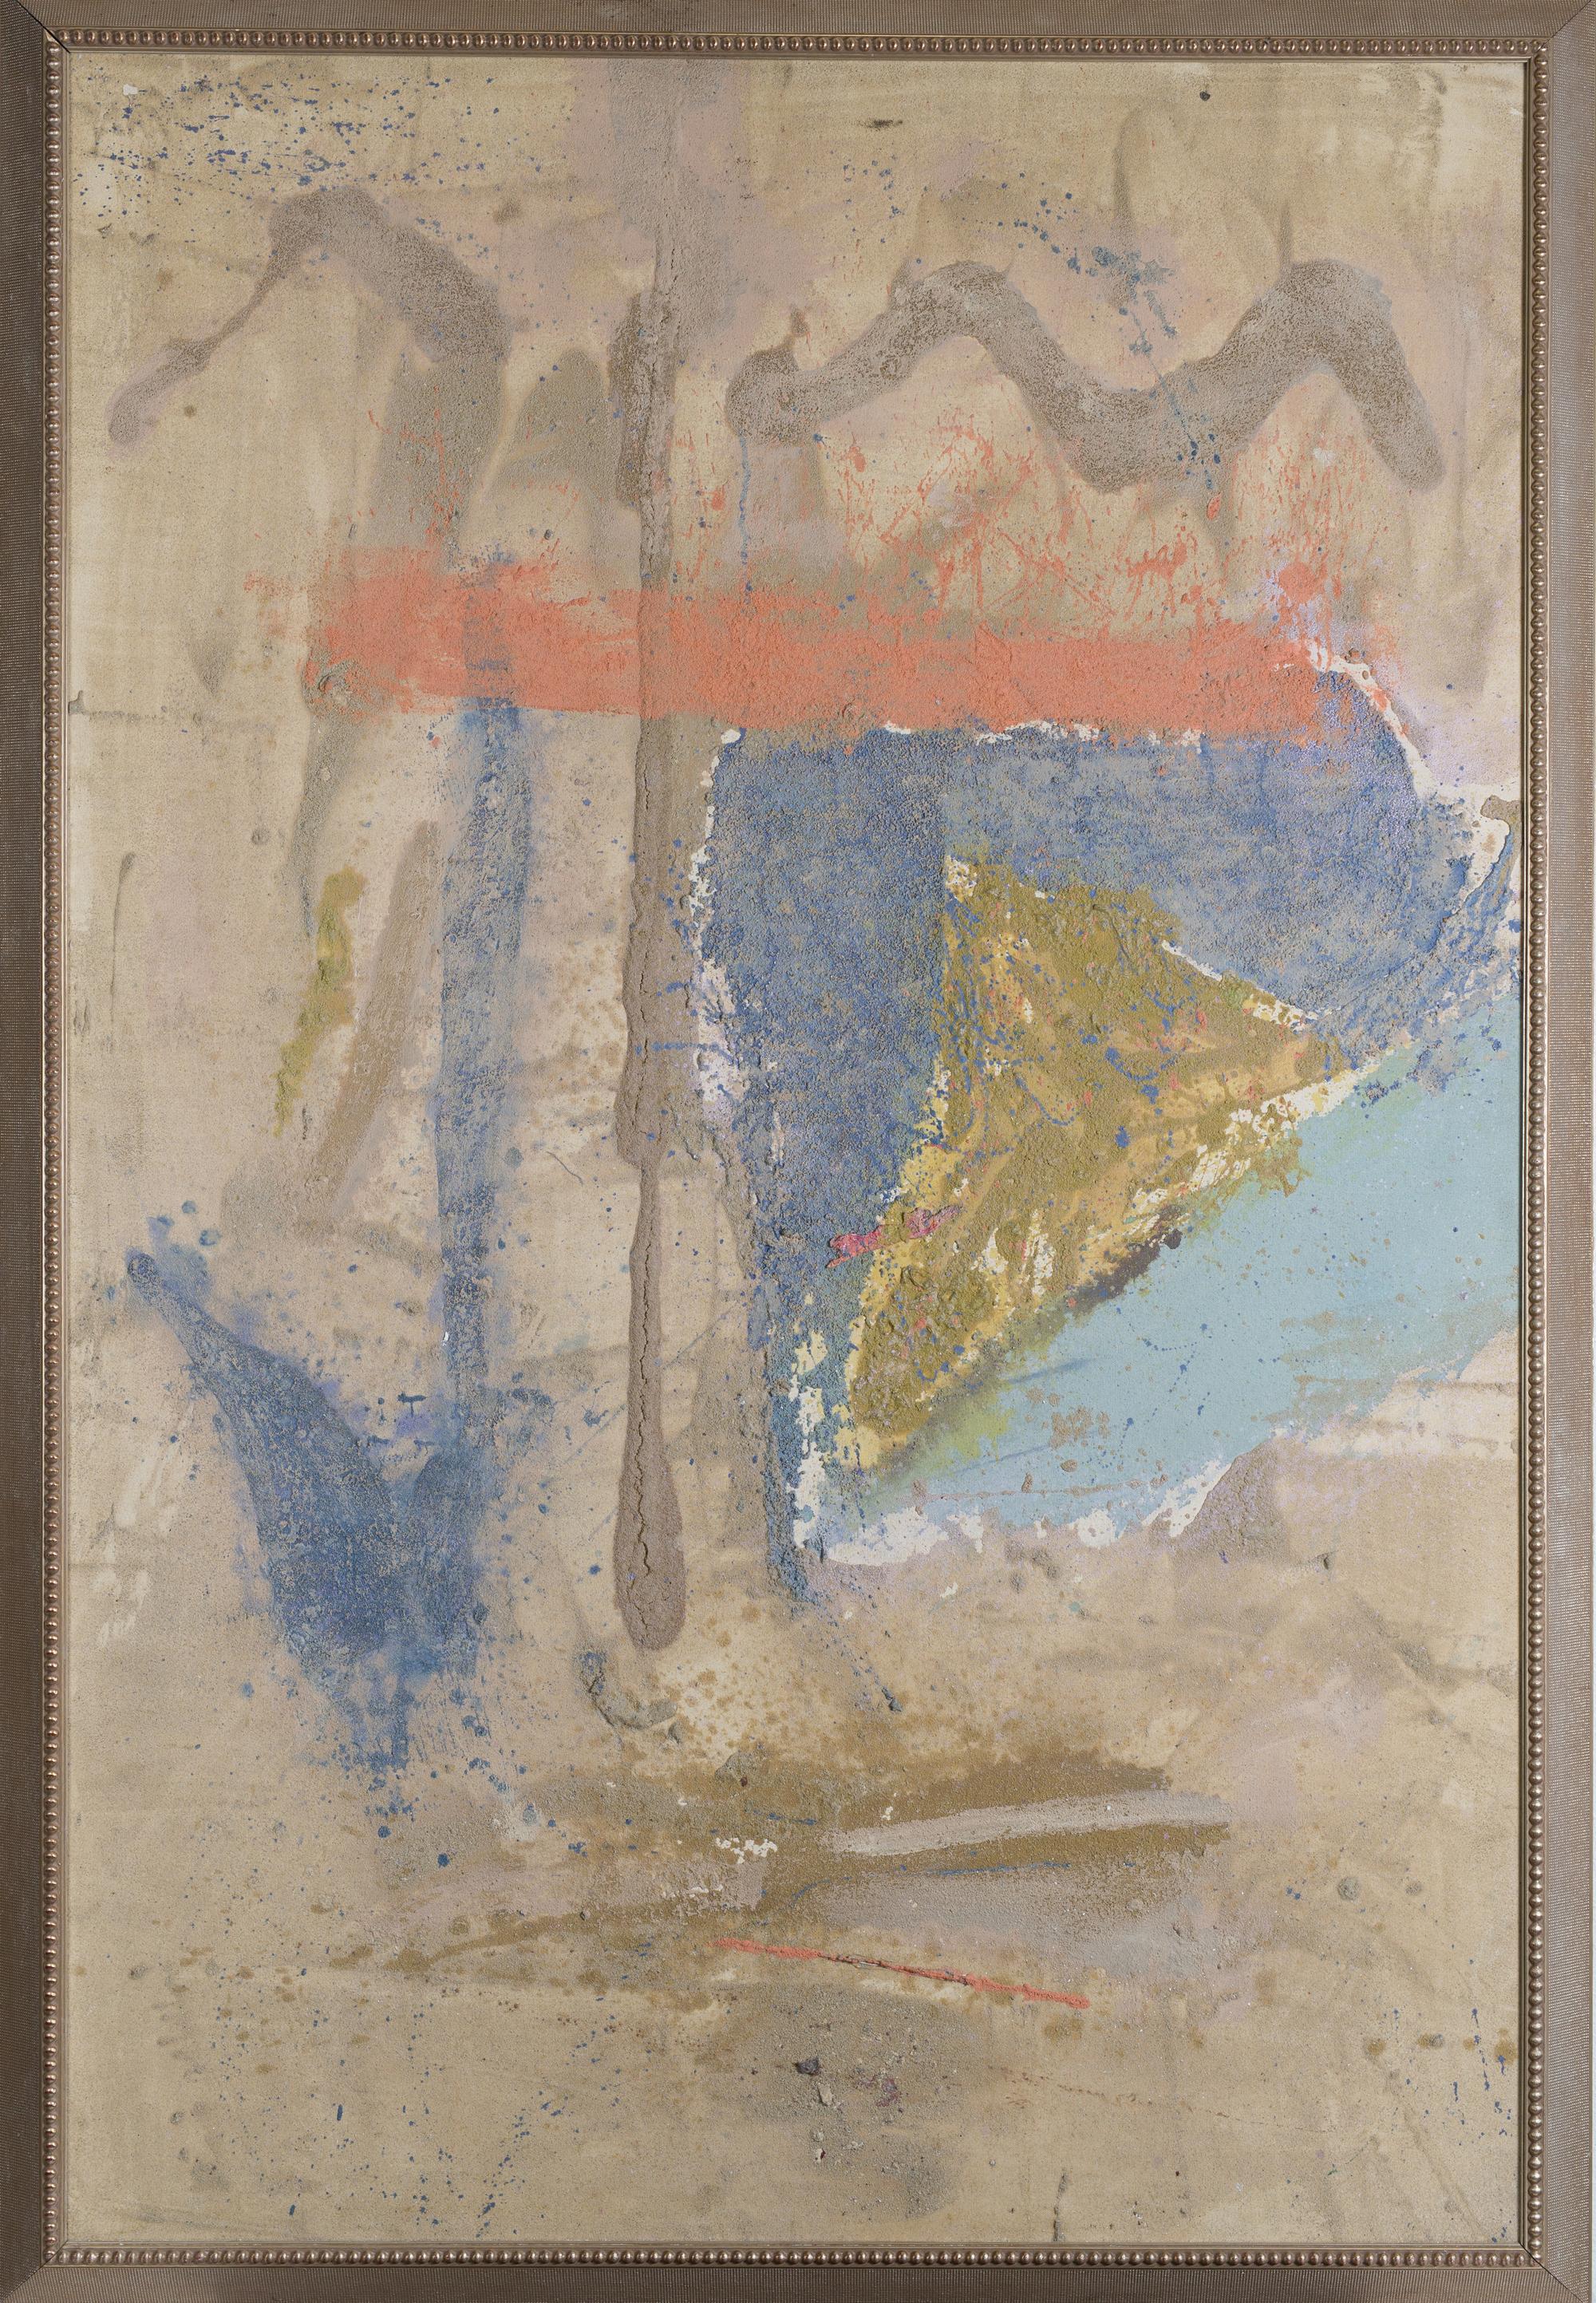 The Lake (Abstract Composition) Red Blue & Brown - South African Artist 1991 o/c - Painting by Jabulane Sam Nhlengethwa